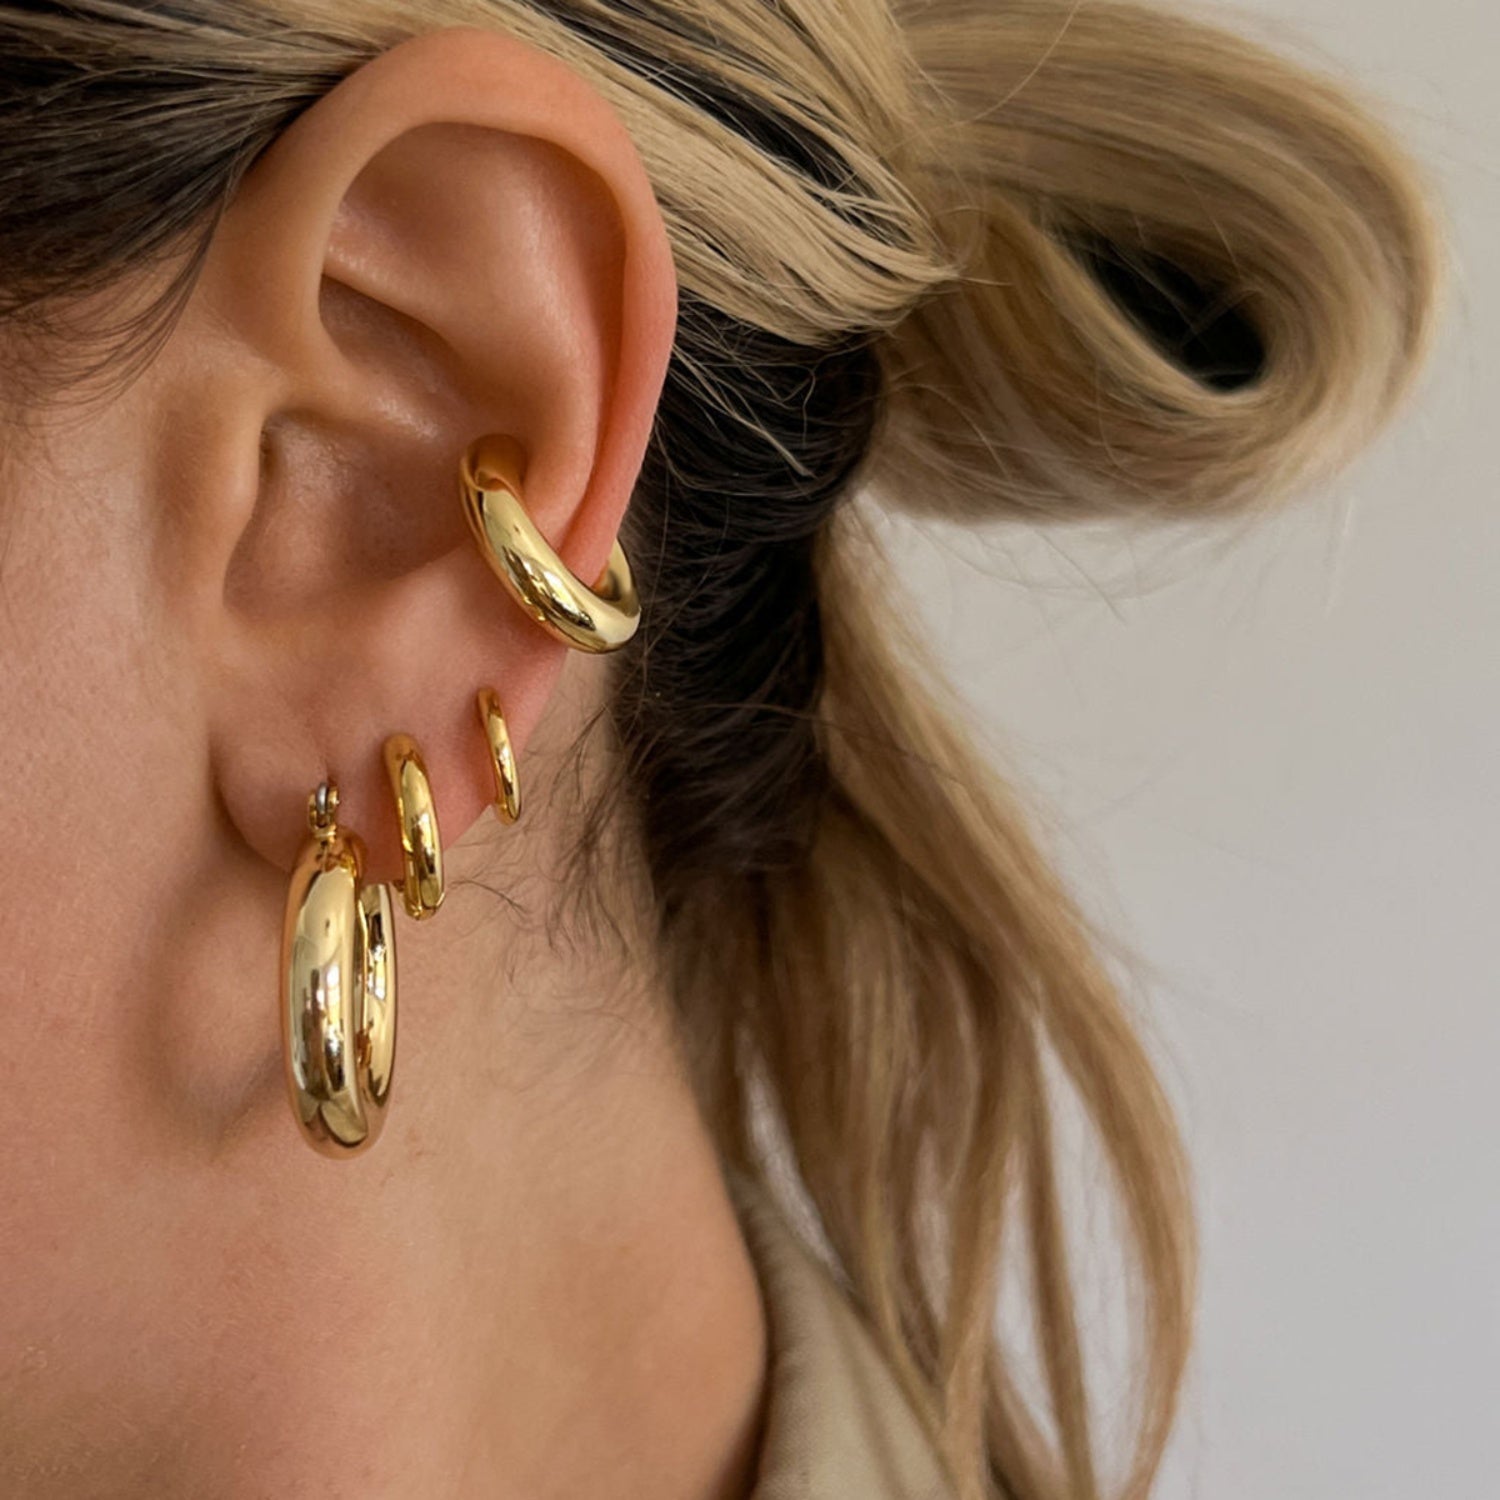 Close-up of a person's ear adorned with four Stainless Steel Letter C Shape Clip On Earrings from Marianela's Exclusive Shop, LLC of decreasing size. The person has light hair tied back, and the earrings are positioned from the lobe up through the cartilage. The background is a plain, off-white color.